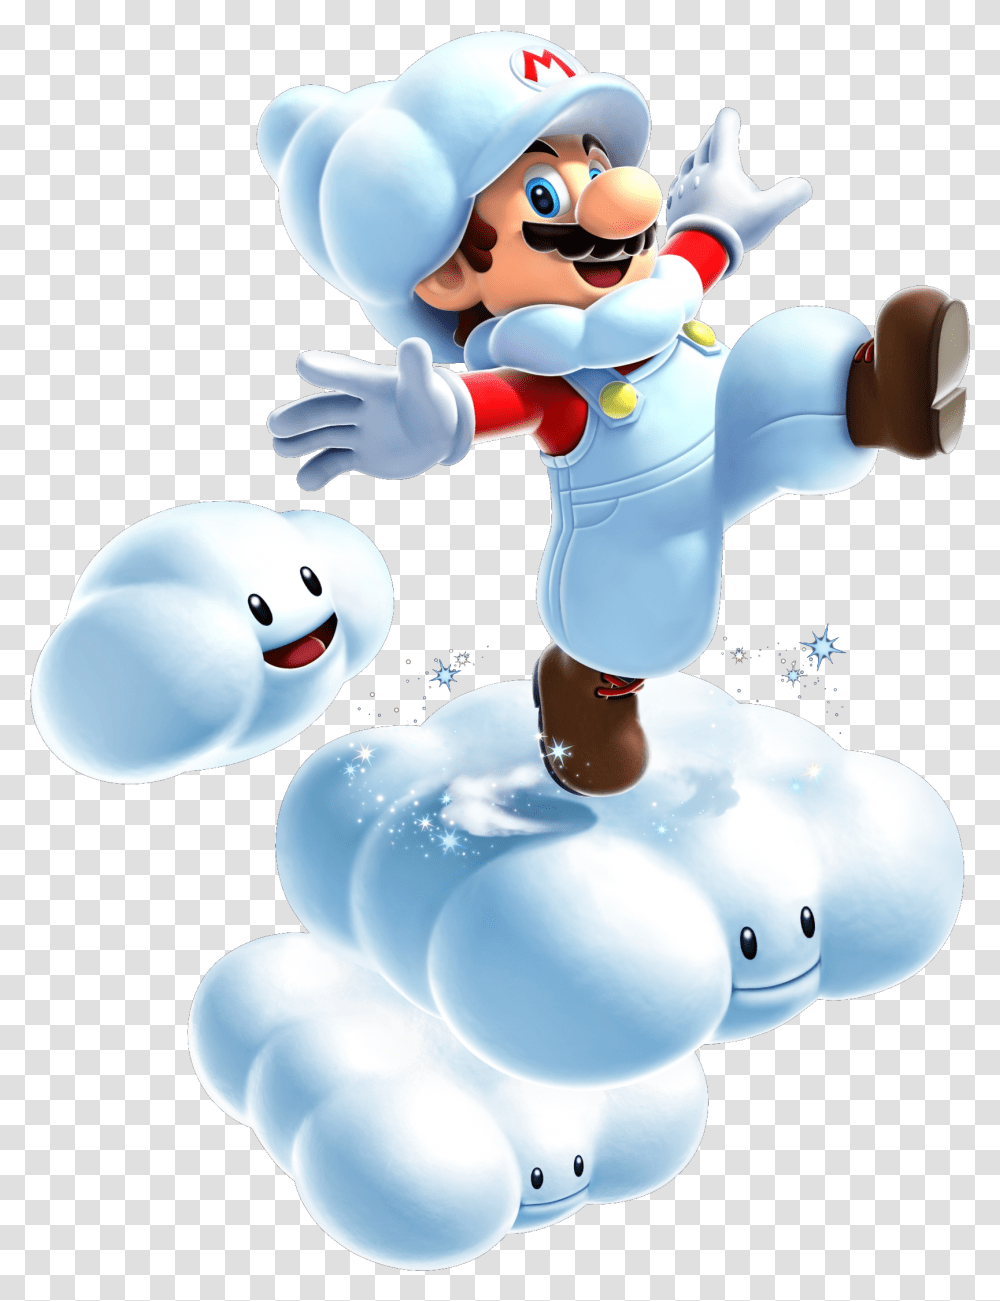 Google Image Result For Httpimages1wikianocookienet Super Mario Galaxy 2 Cloud Mario, Snowman, Winter, Outdoors, Nature Transparent Png